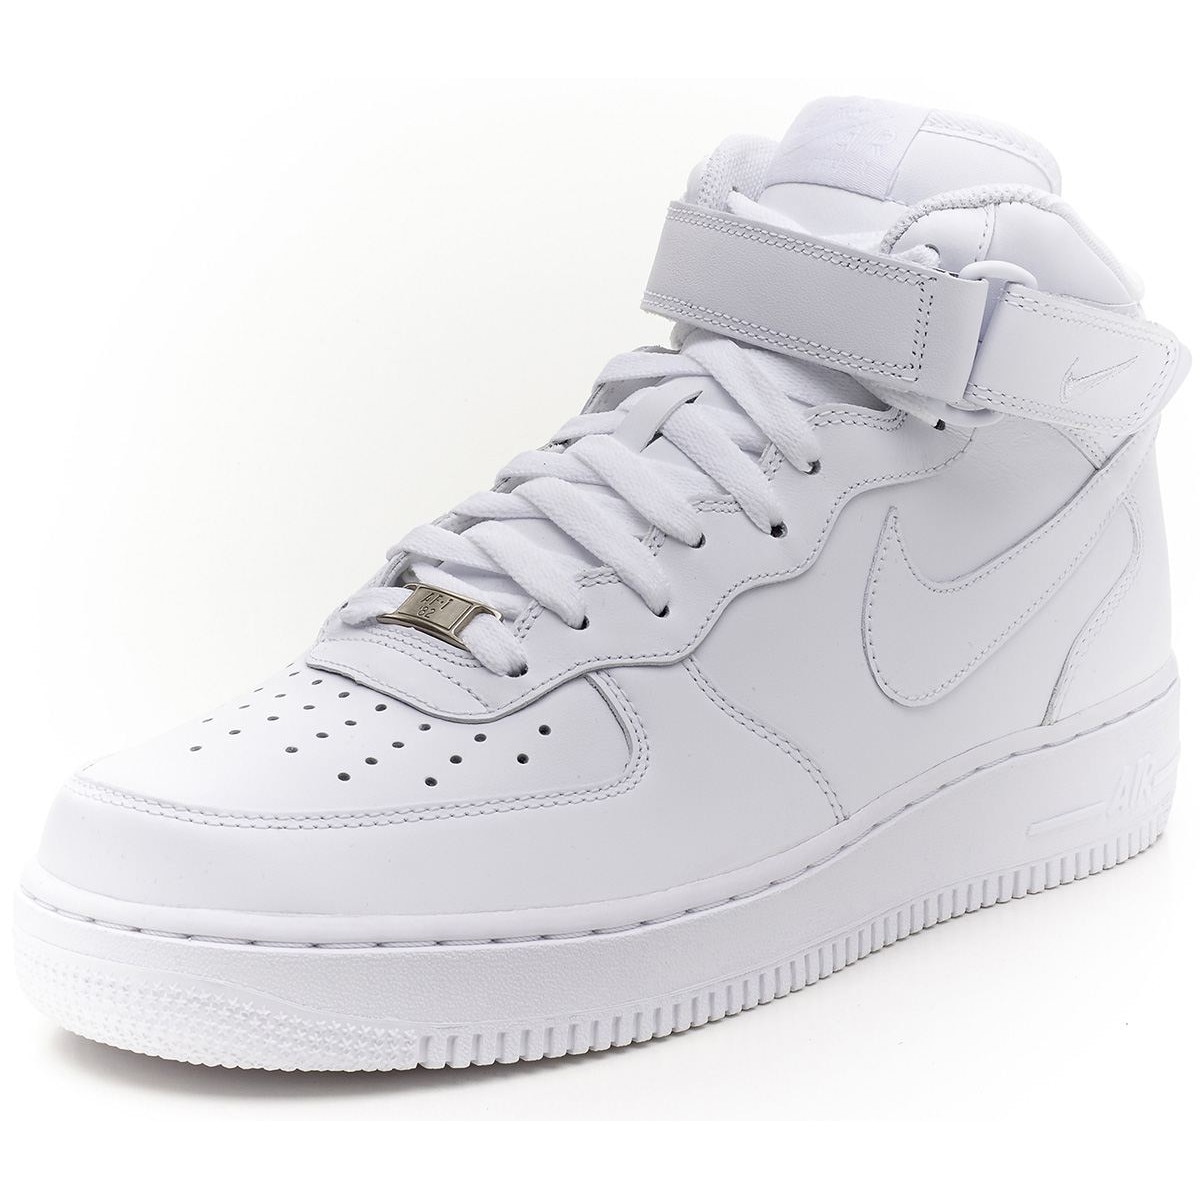 nike air force 1 07 mid 42 